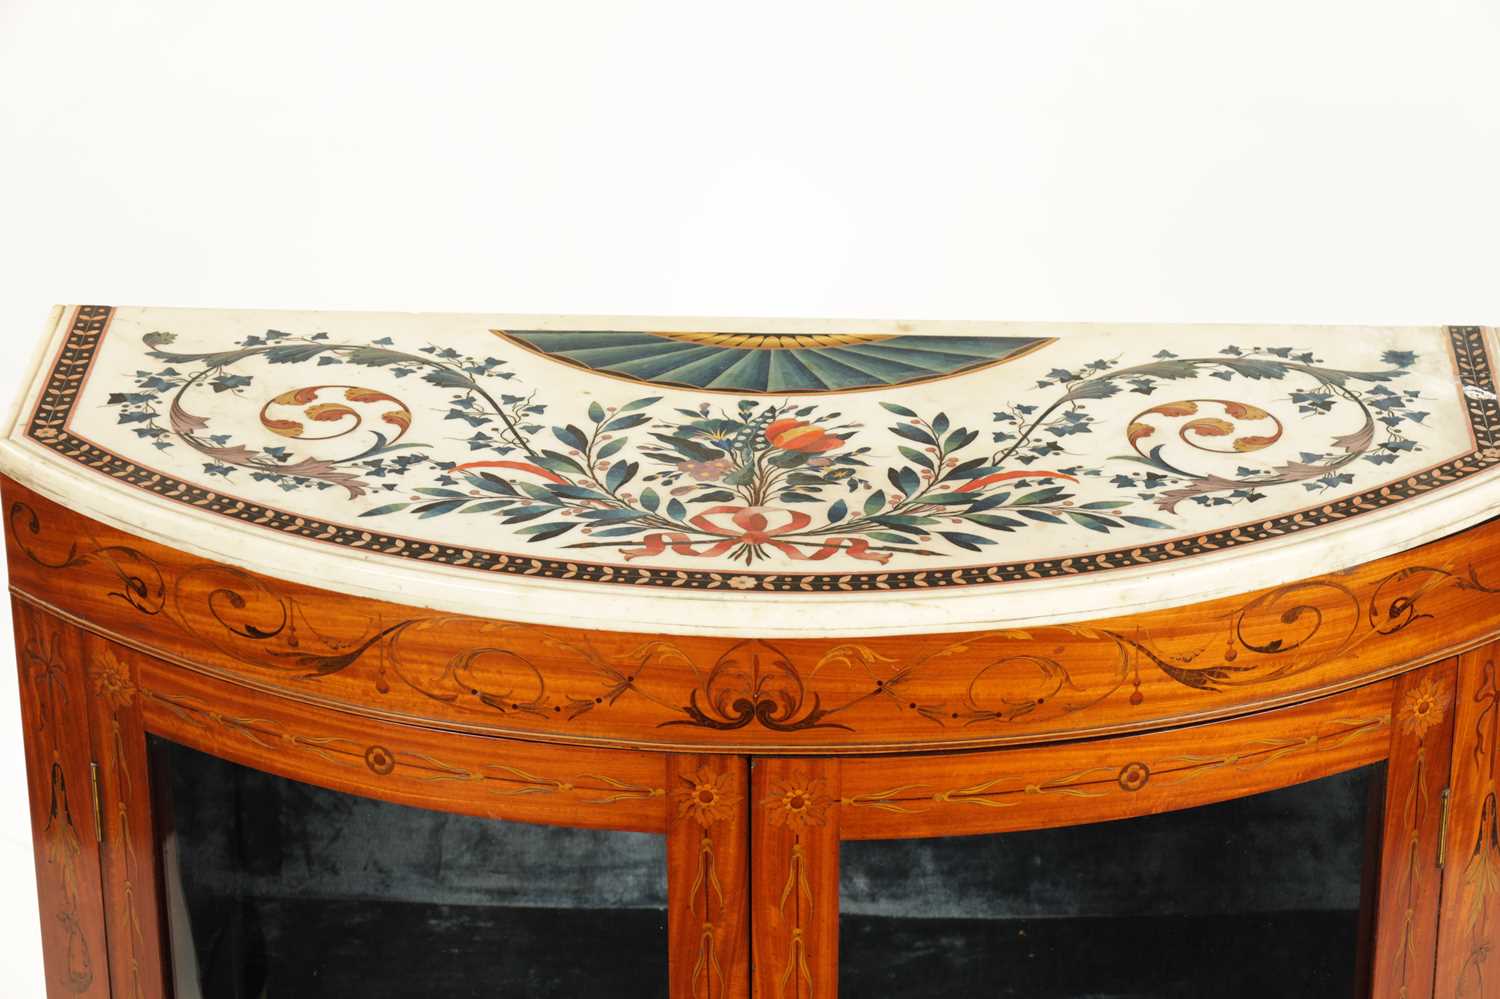 A FINE PAIR OF GEORGE III INLAID SATINWOOD BOW-FRONT SIDE CABINETS IN THE MANNER OF MOORE OF DUBLIN - Image 7 of 14